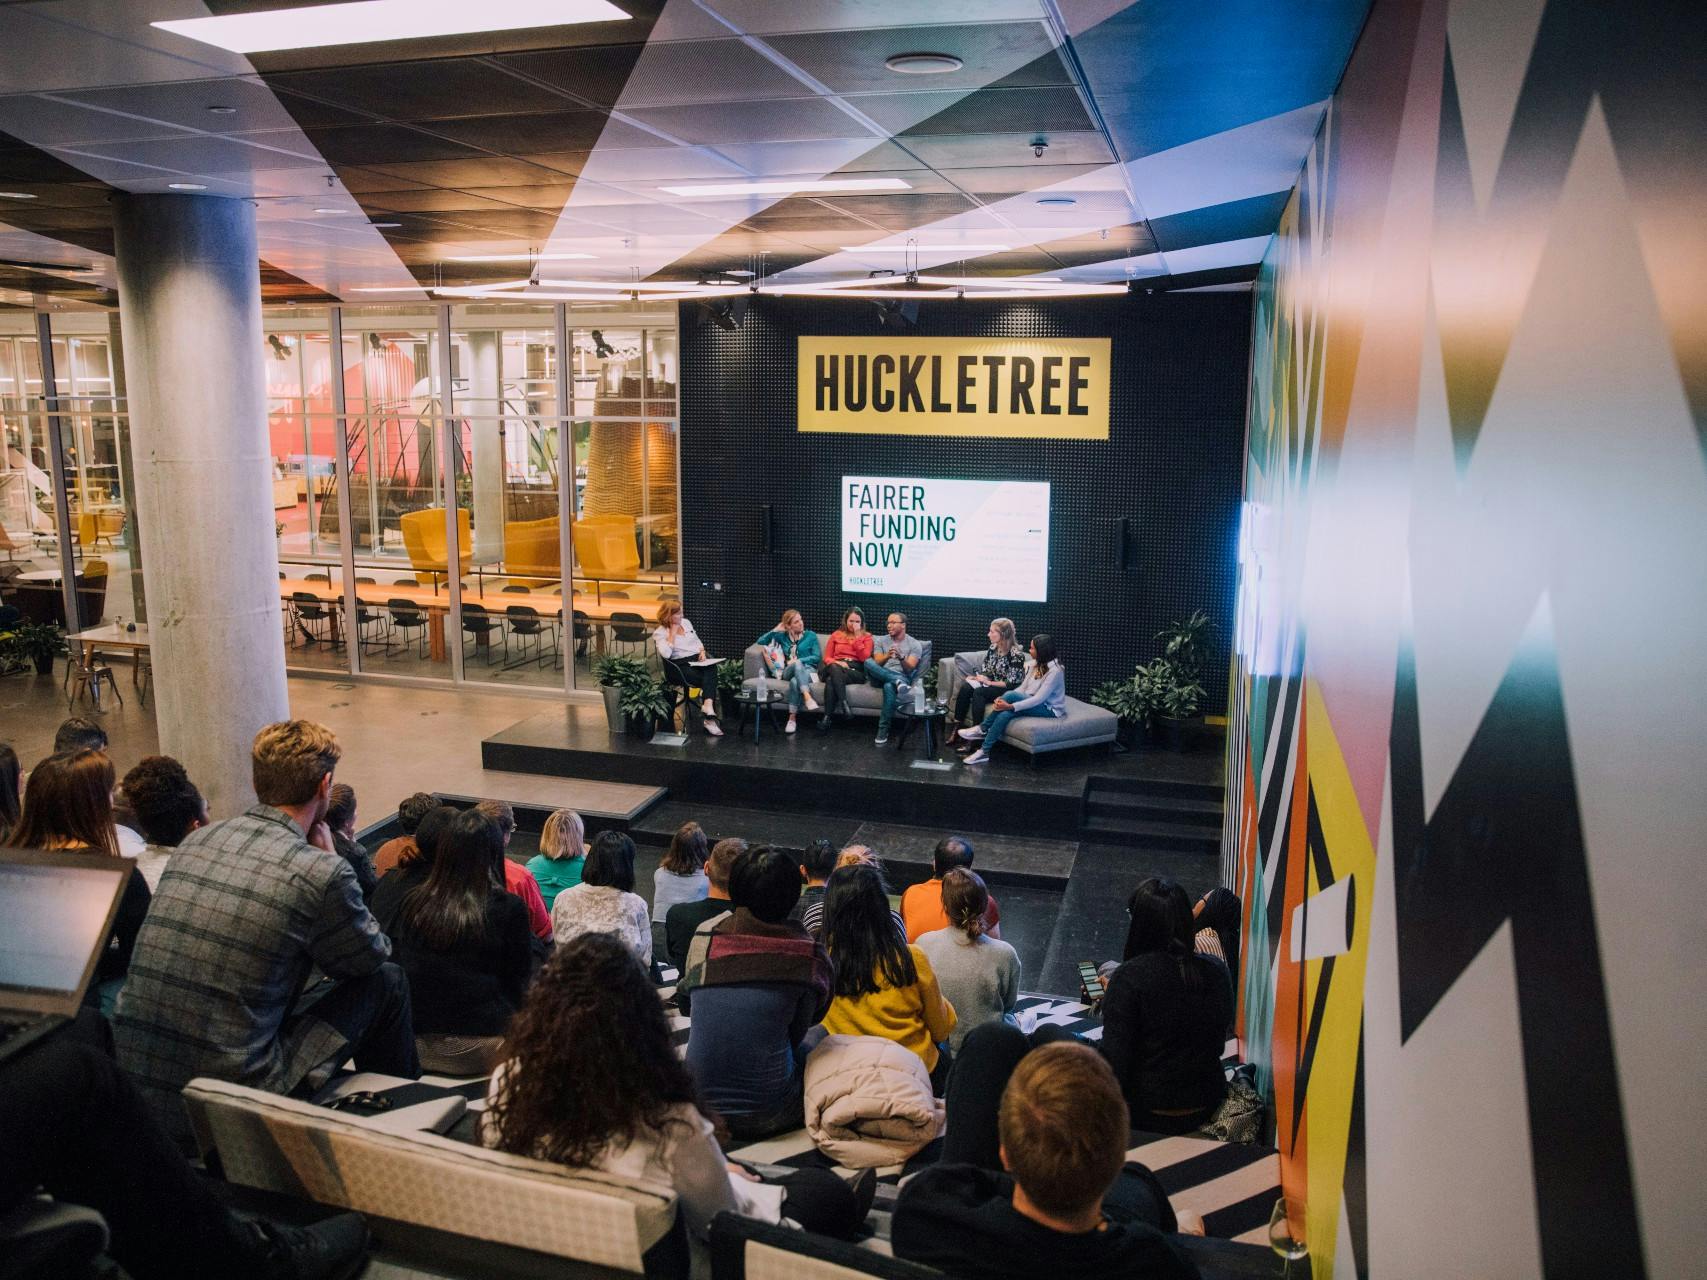 huckletree fairer funding campaign event